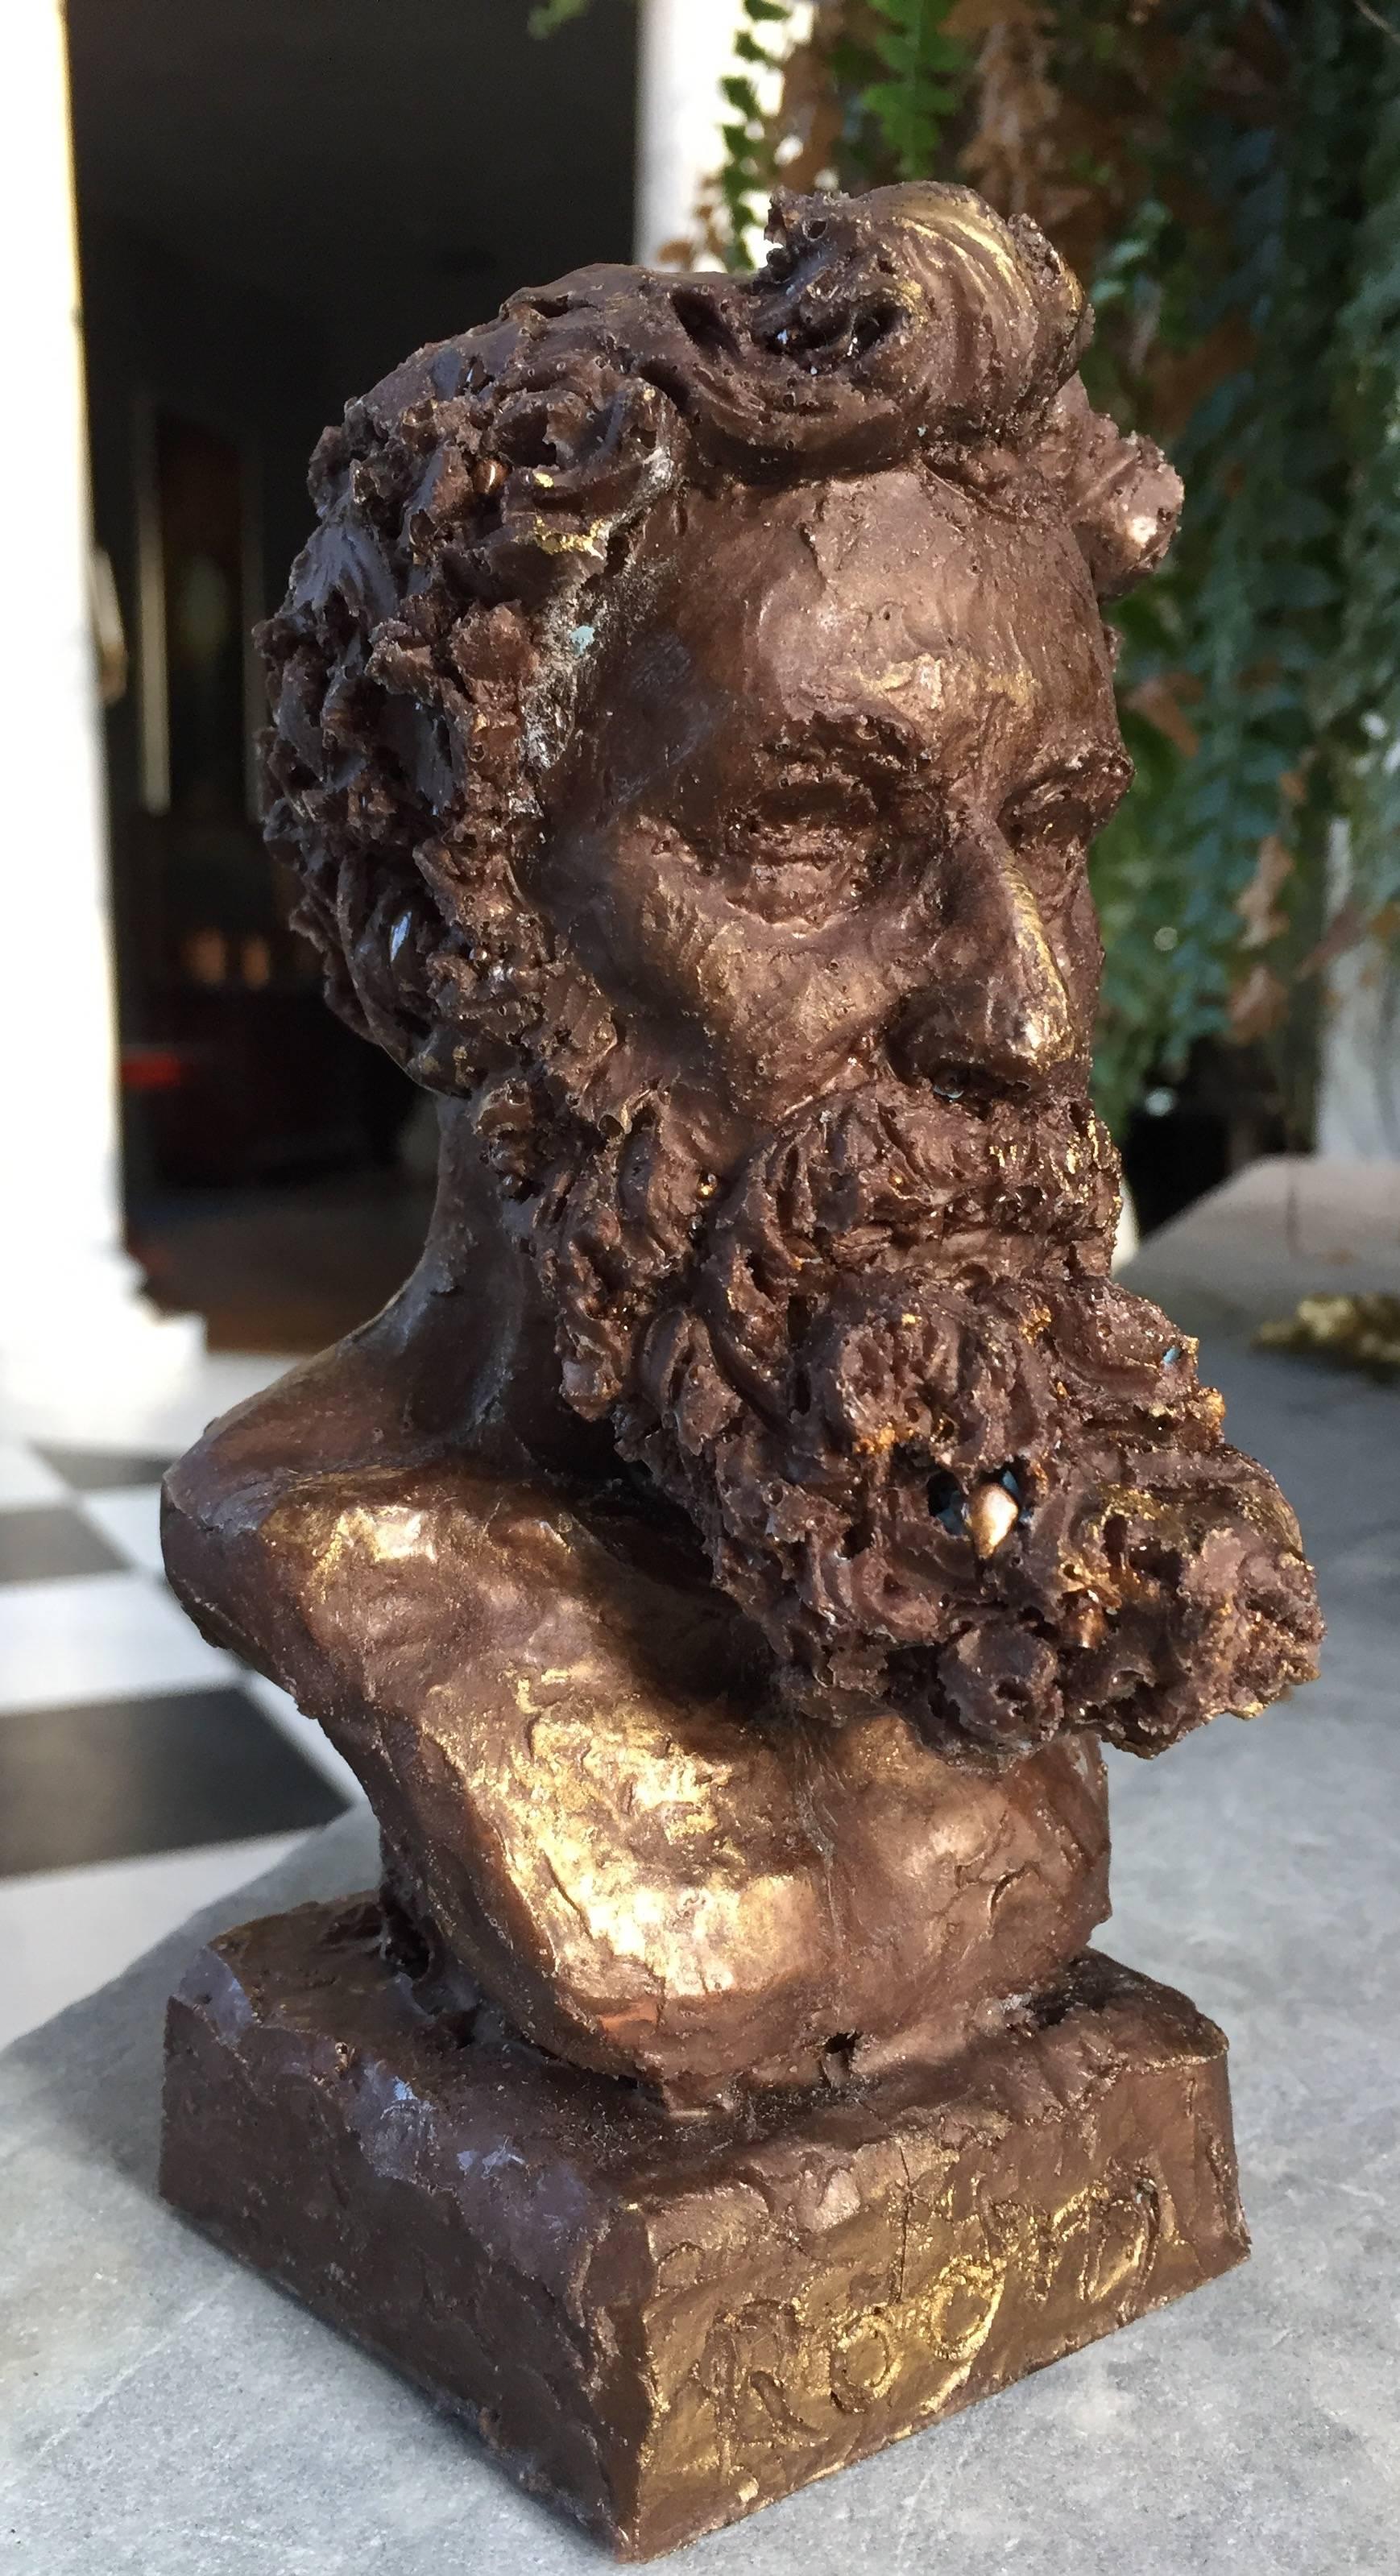 Bronze bust of Rodin by Sculptor Daniel Altshuler, 2016.
This is sculptor Daniel Altshuler's most recent creation. It is the bust of French Sculptor August Rodin, who's work he greatly admires.
Daniel Altshuler went to the School of The Museum of